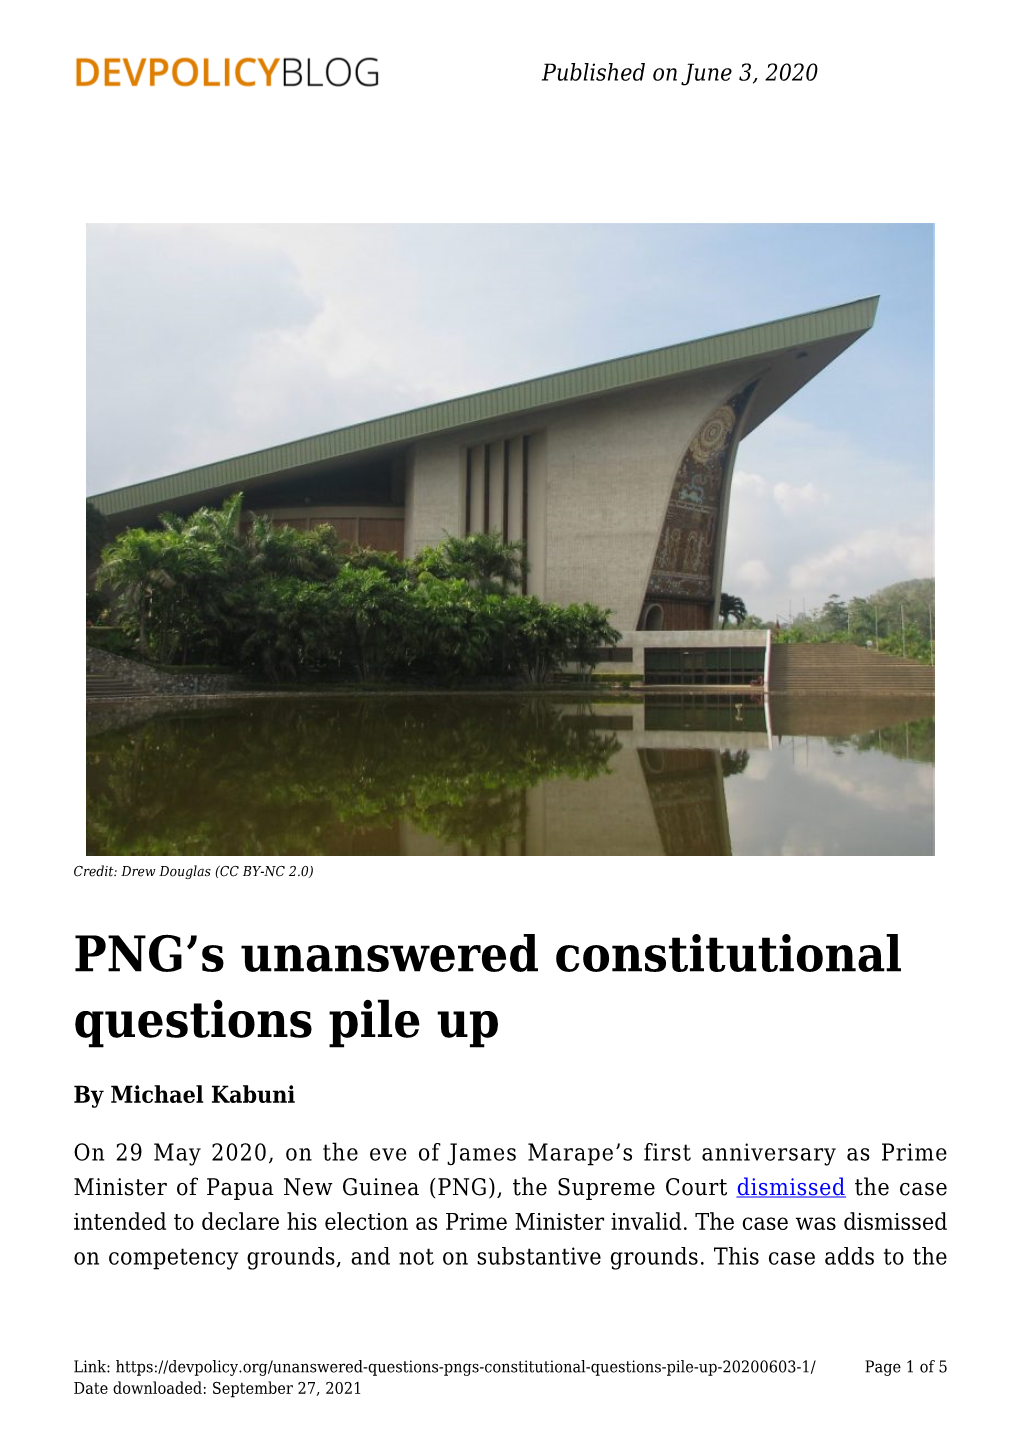 PNG's Unanswered Constitutional Questions Pile Up